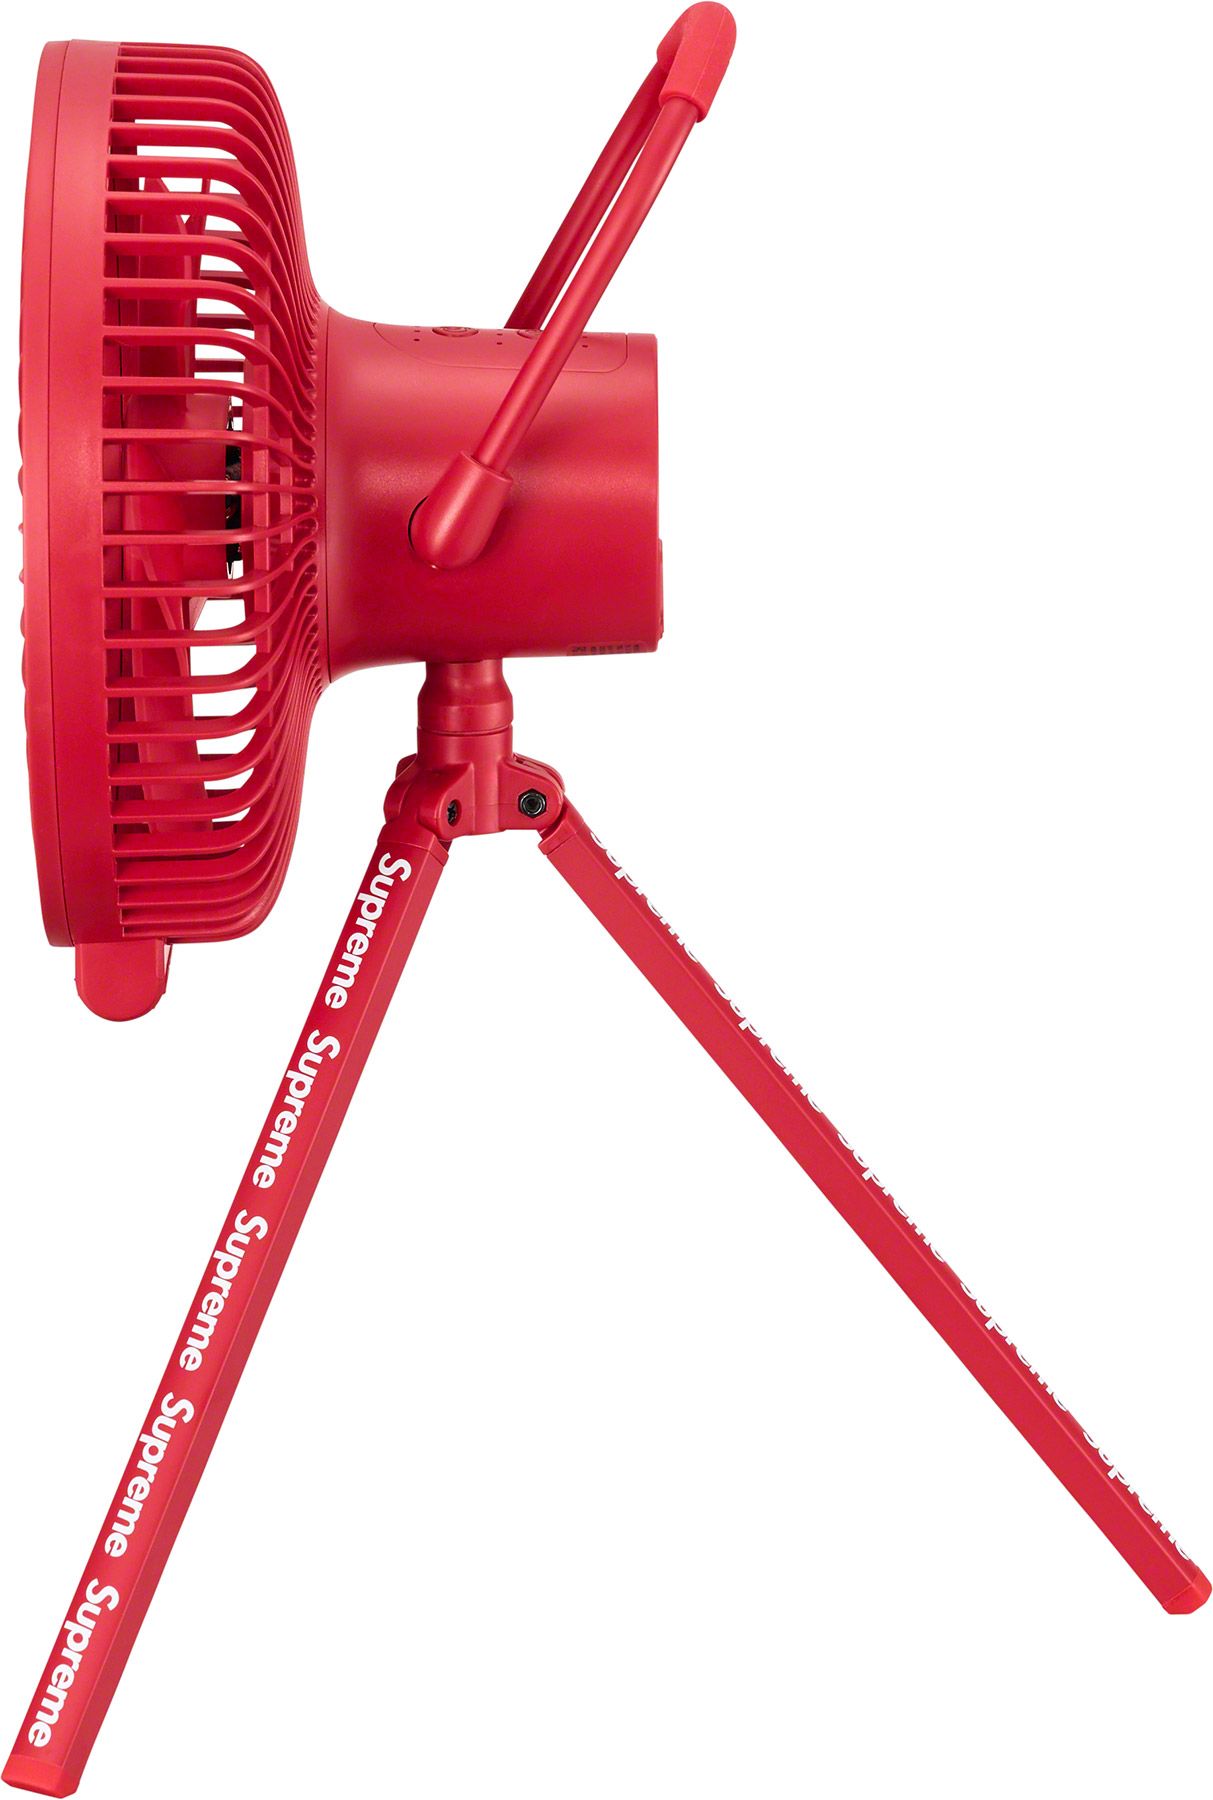 Supreme Cargo Container Electric Fan Red | www.causus.be